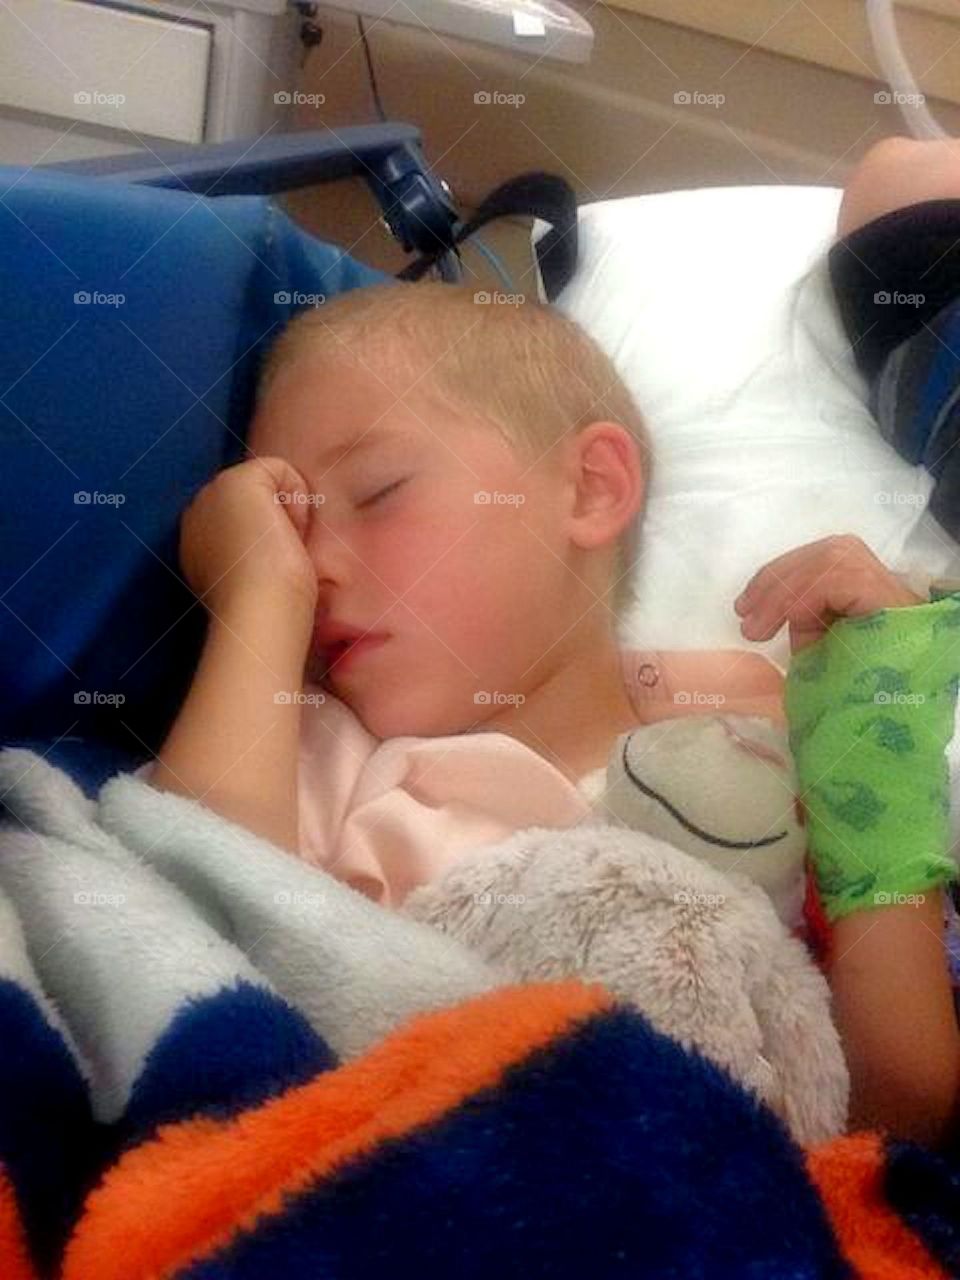 Recovery After Surgery. Young child waking up after getting his tonsils out at the hospital.